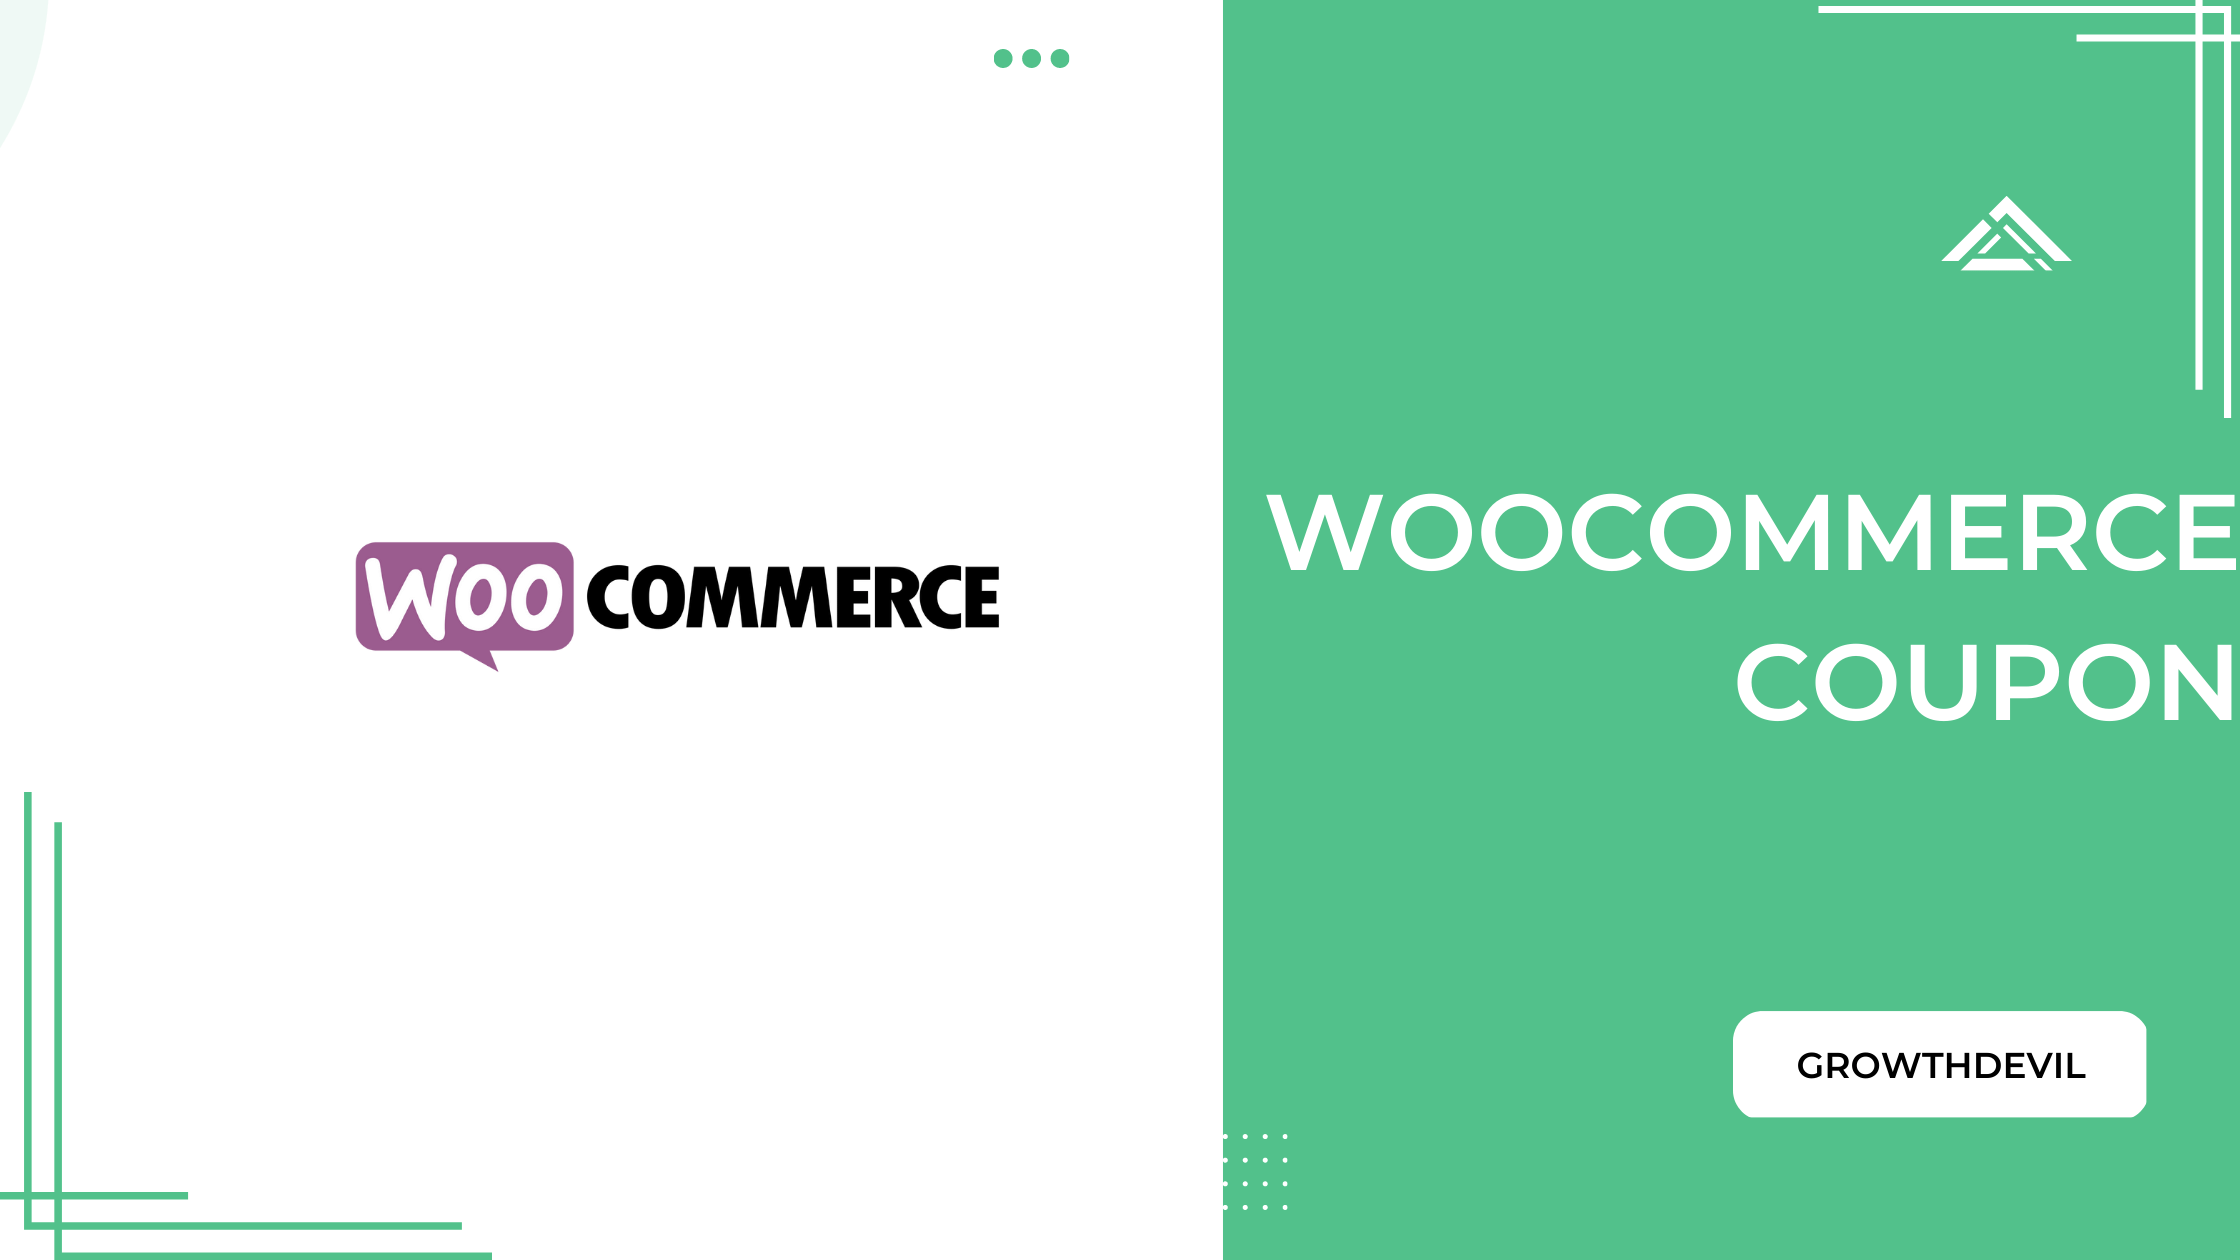 WooCommerce Coupon - GrowthDevil